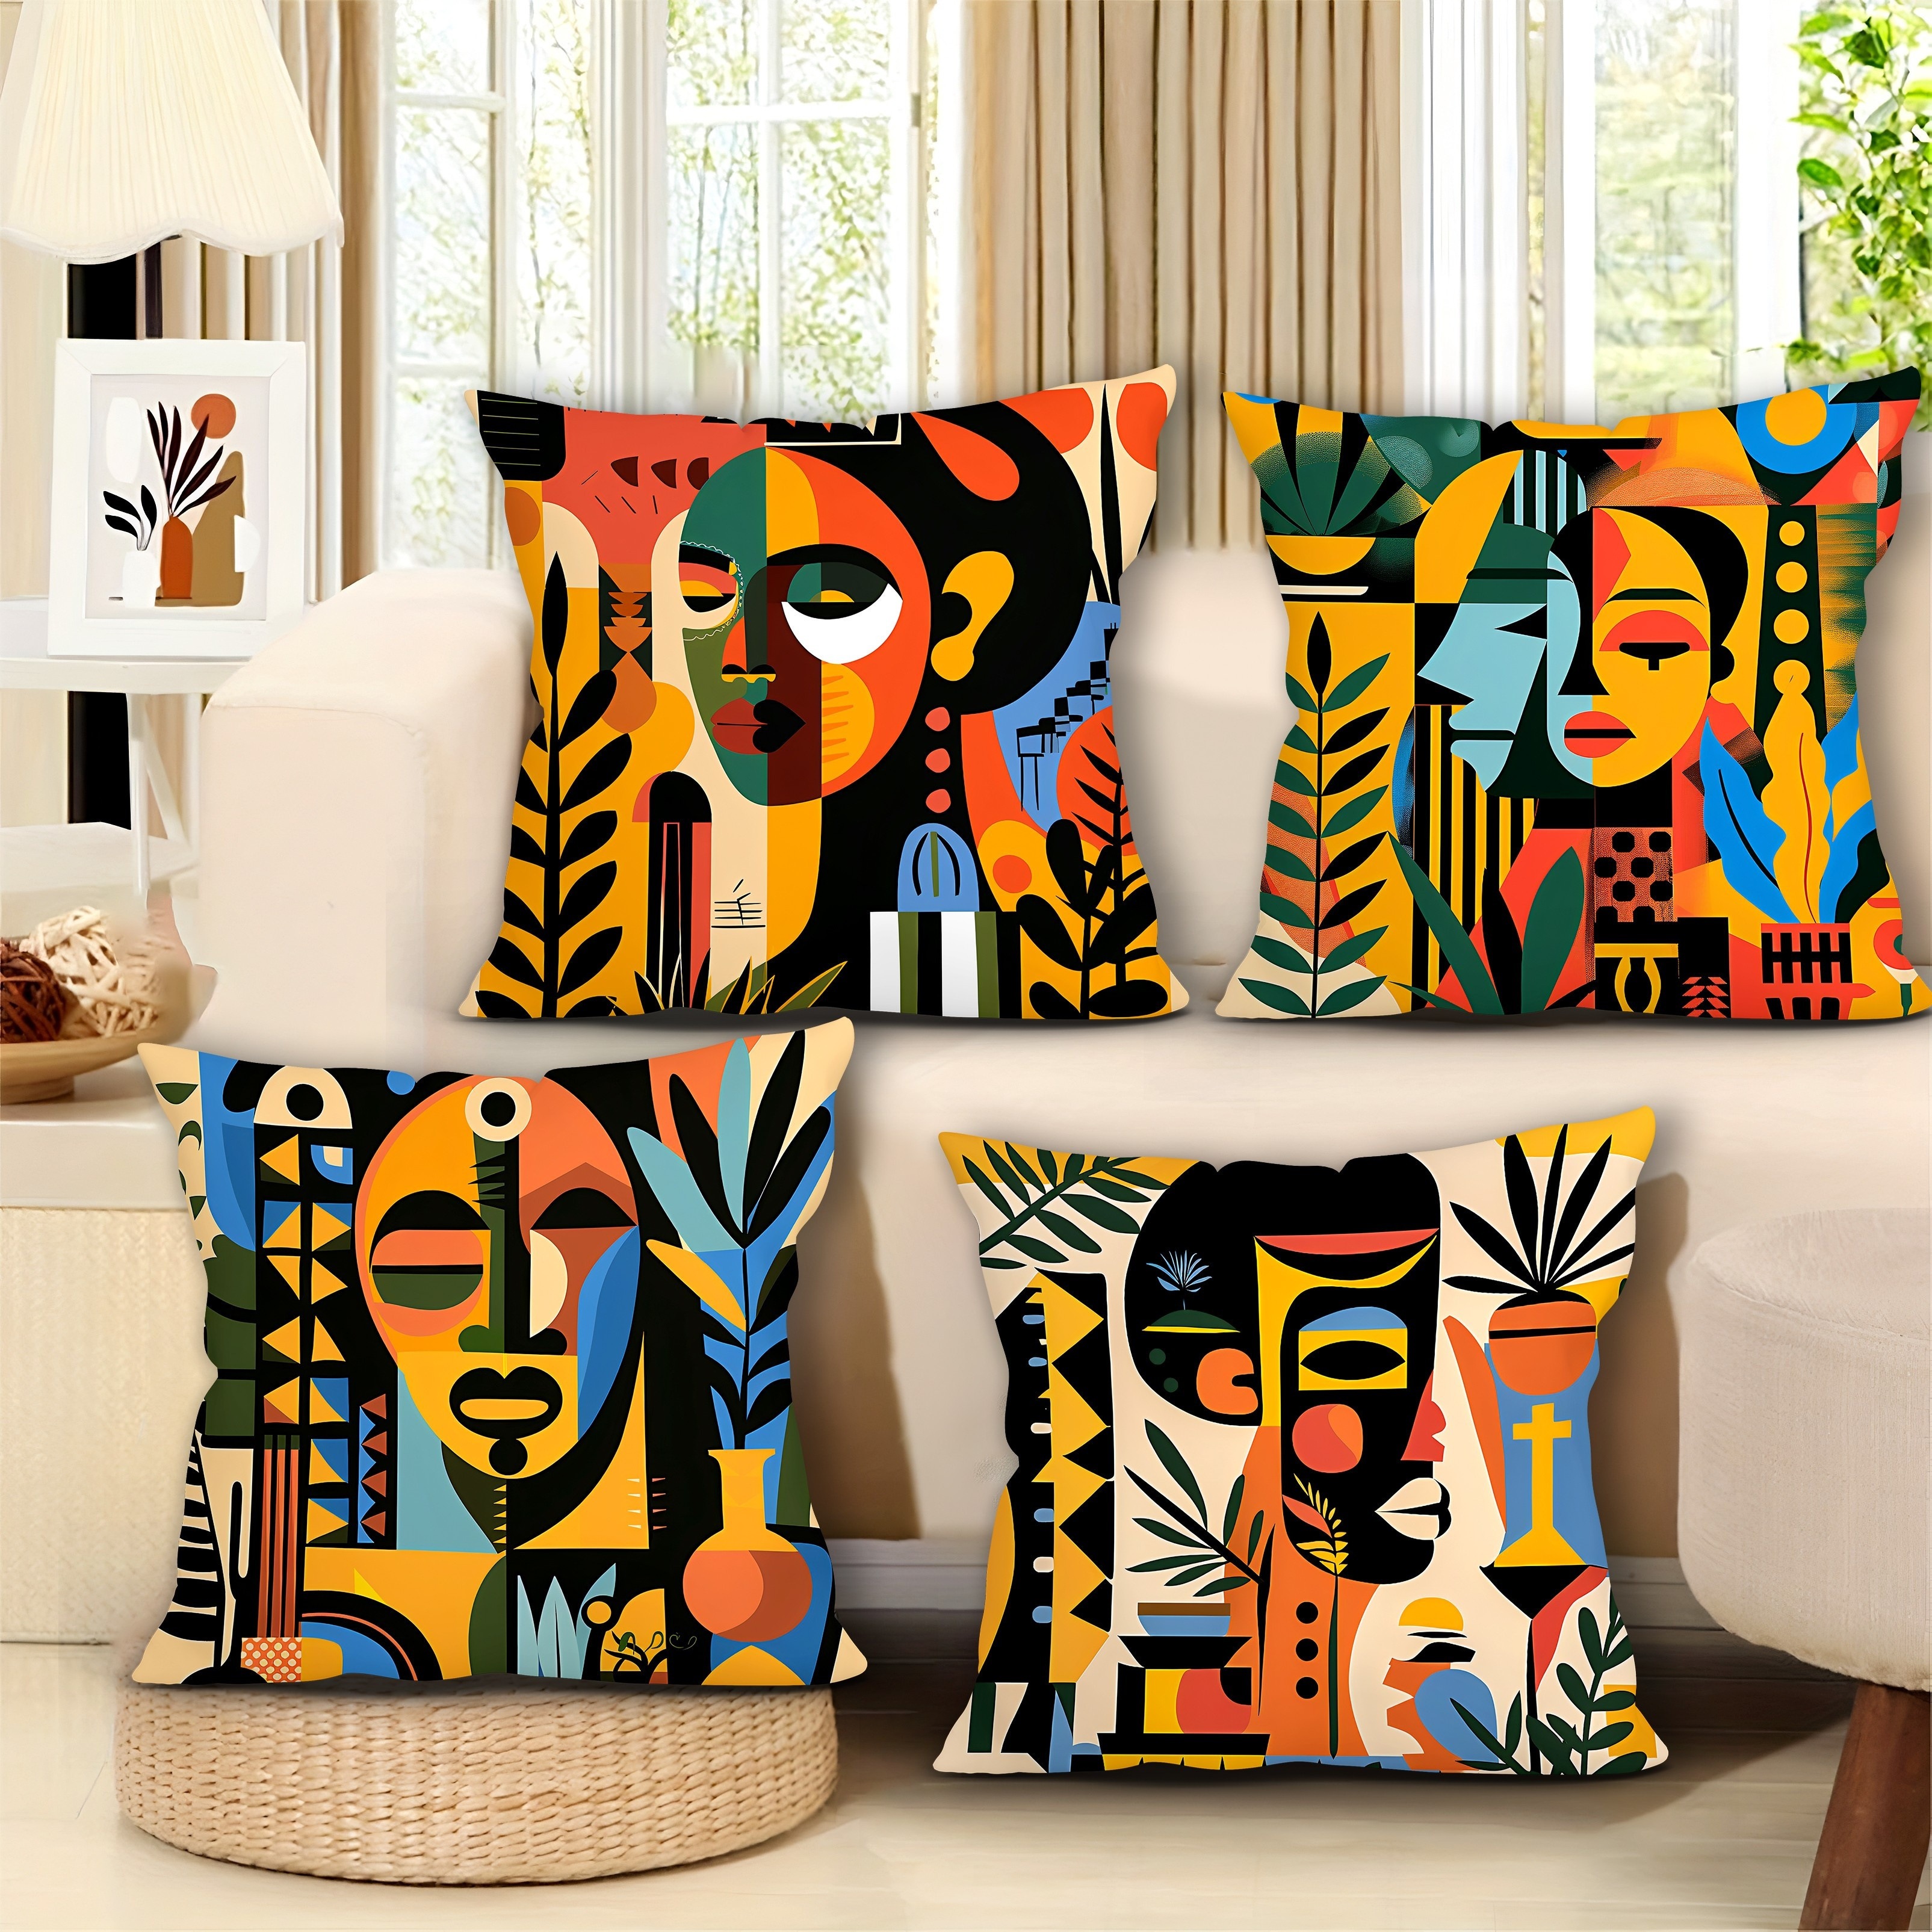 

4-piece Set Soft Short Plush Pillow Covers With Vintage Ethnic Designs, 17.7"x17.7", Zip Closure - Perfect For Home, Office, And Car Decor